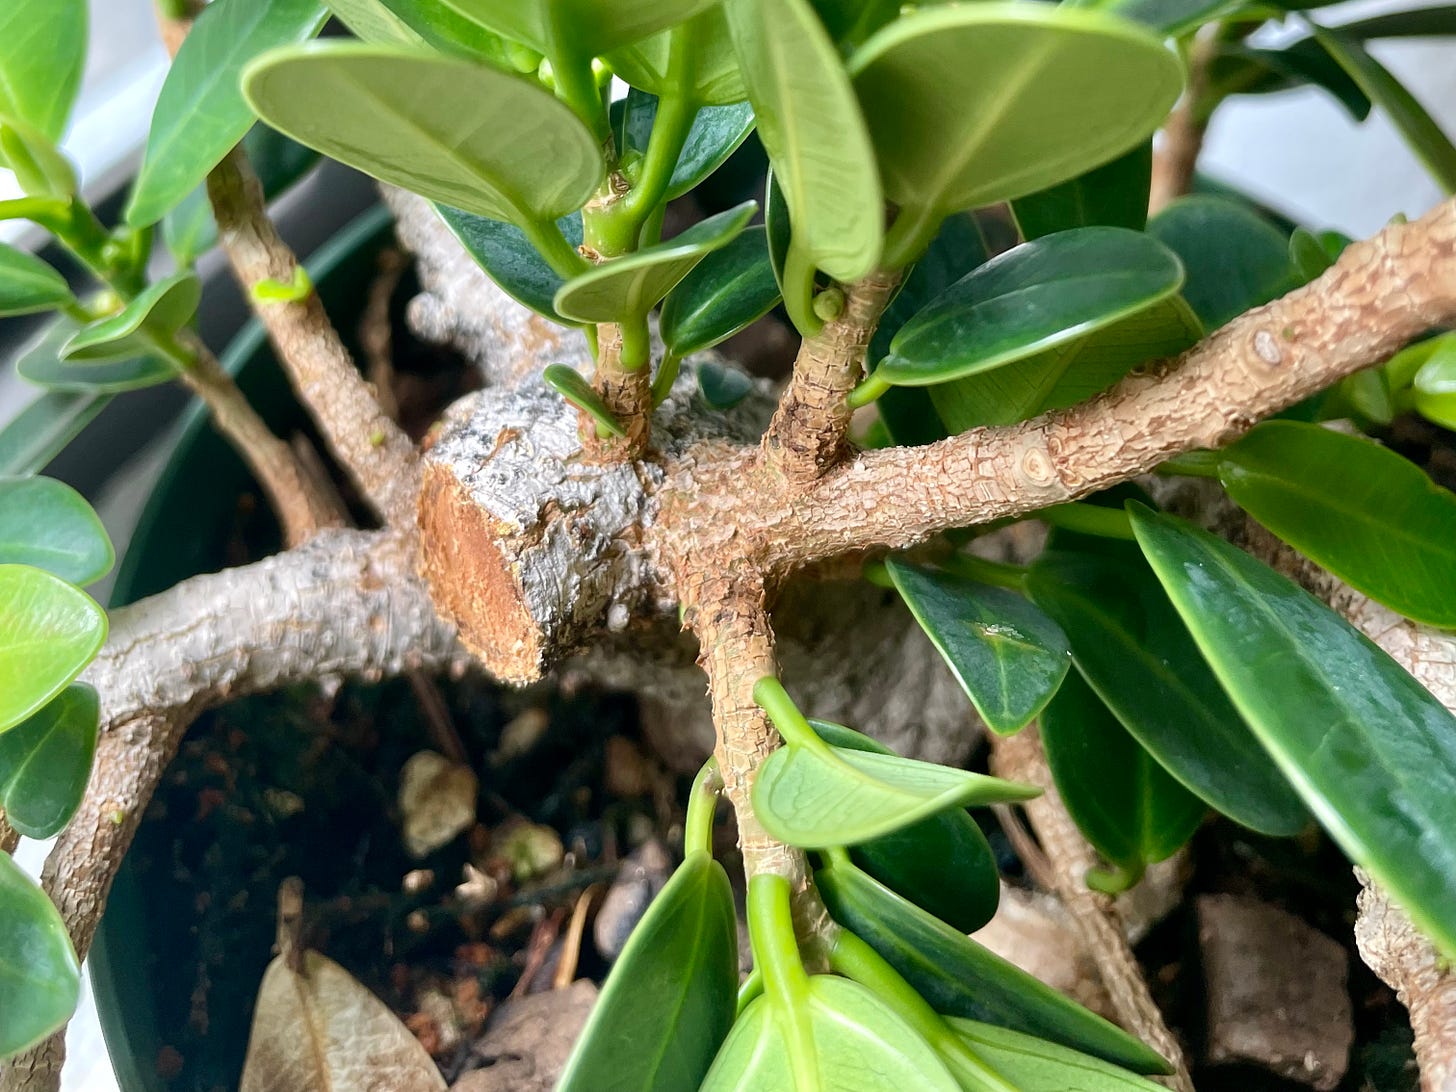 ID: A closeup view of the ficus from above showing a cut branch and fattening new leader.